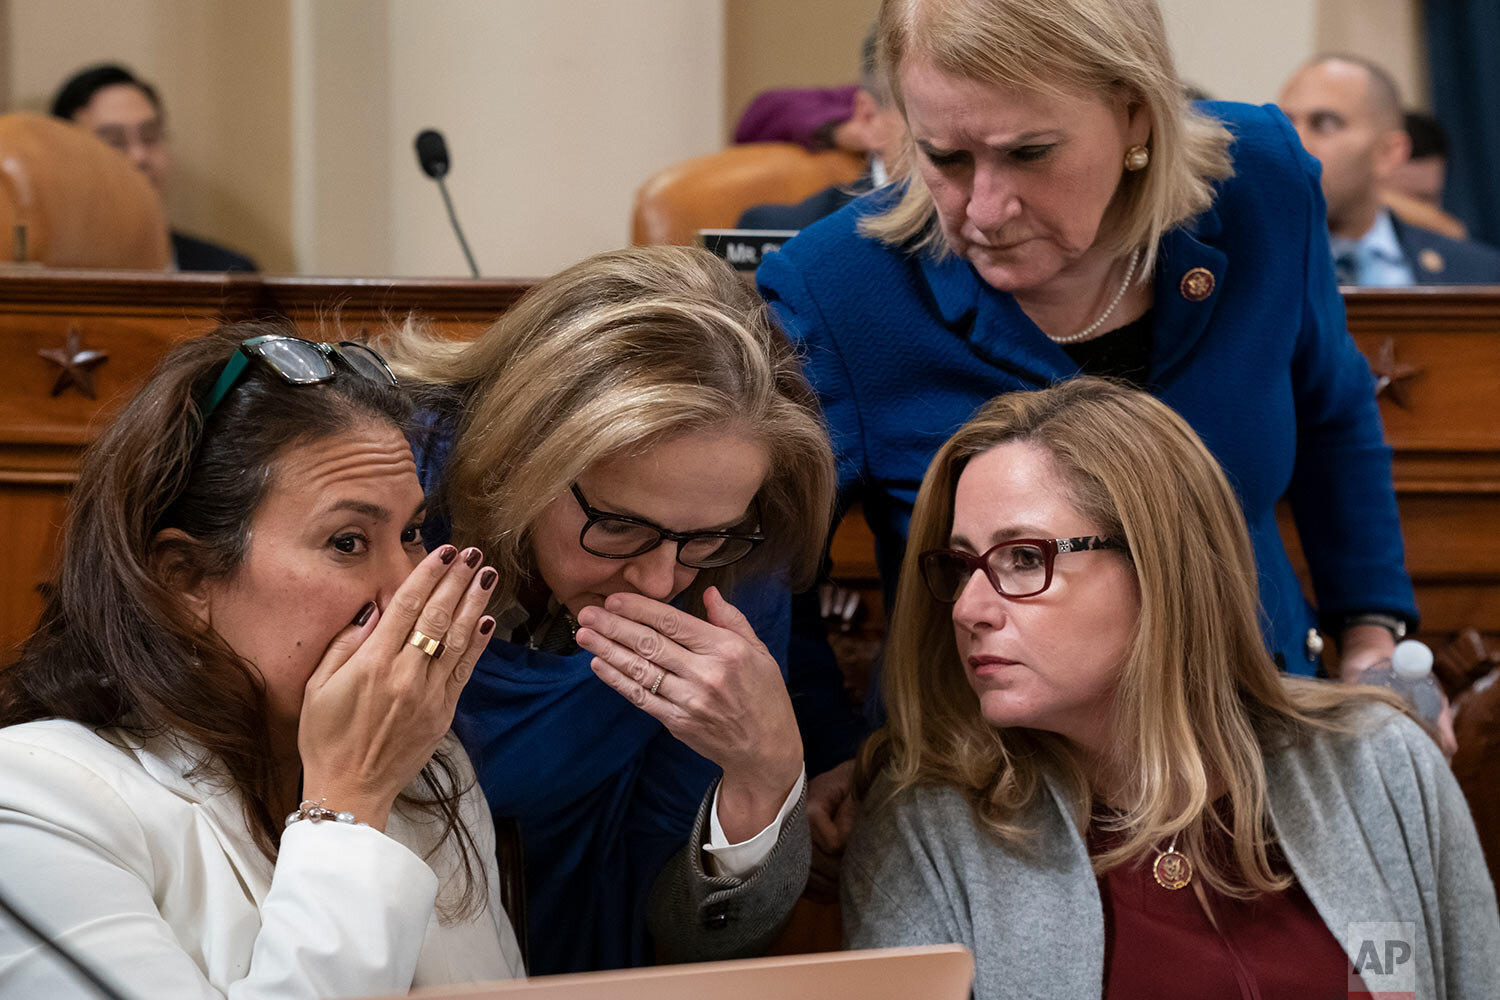  From left, Rep. Veronica Escobar, D-Texas, Rep. Madeleine Dean, D-Pa., and Rep. Debbie Mucarsel-Powell, D-Fla., joined at top right by Rep. Sylvia Garcia, D-Texas, confer with each other as the House Judiciary Committee marks up articles of impeachm